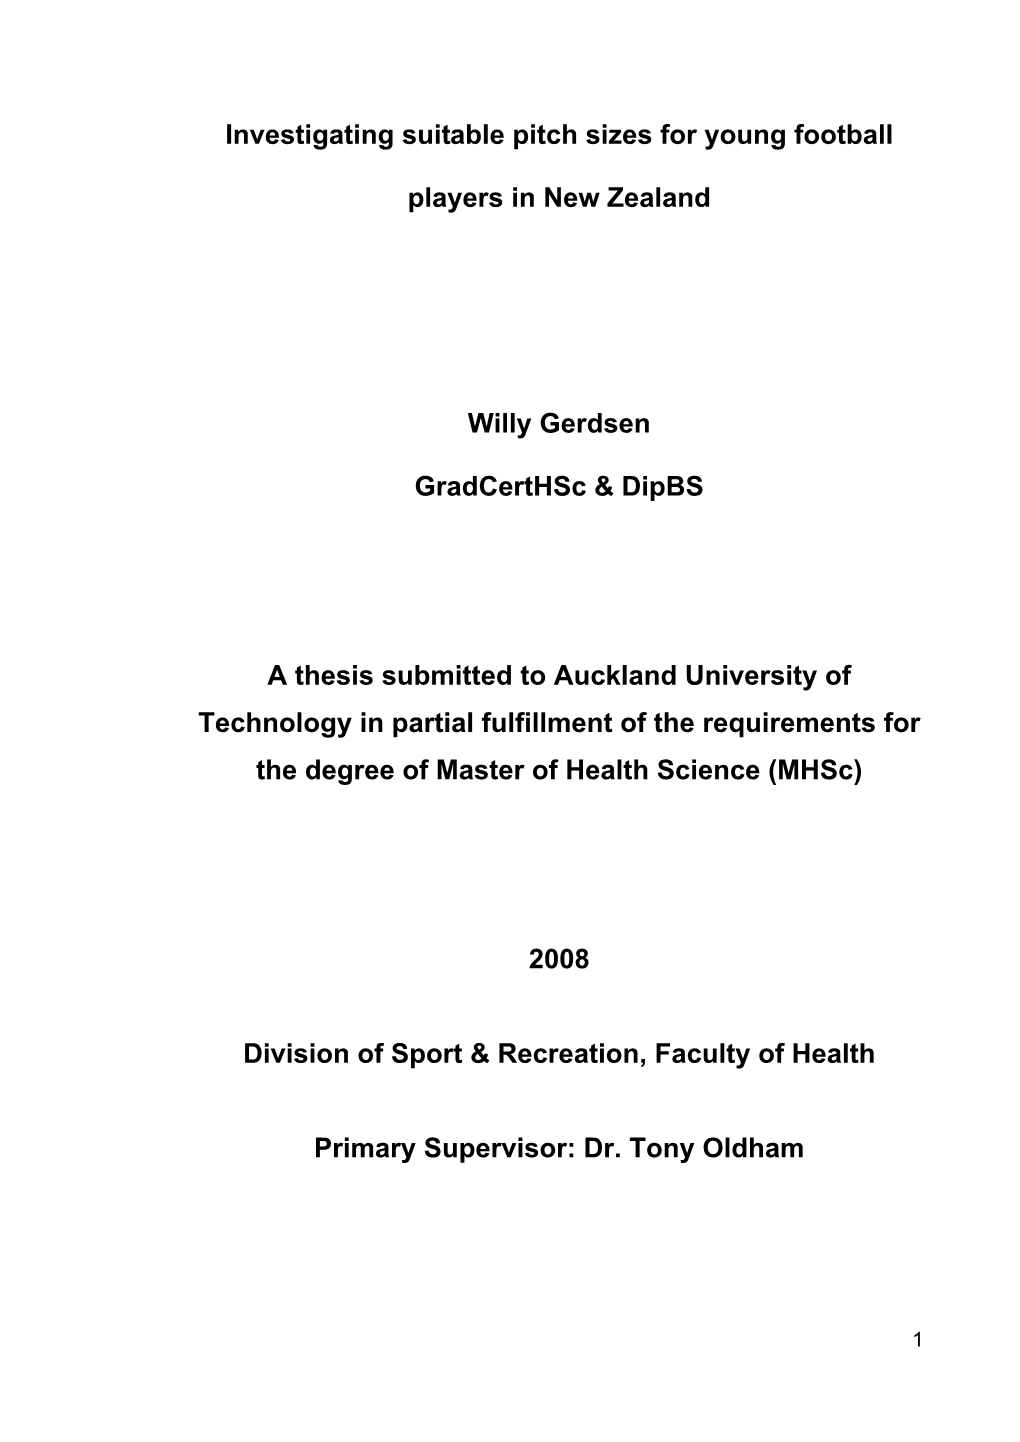 Investigating Suitable Pitch Sizes for Young Football Players in New Zealand Willy Gerdsen Gradcerthsc & Dipbs a Thesis